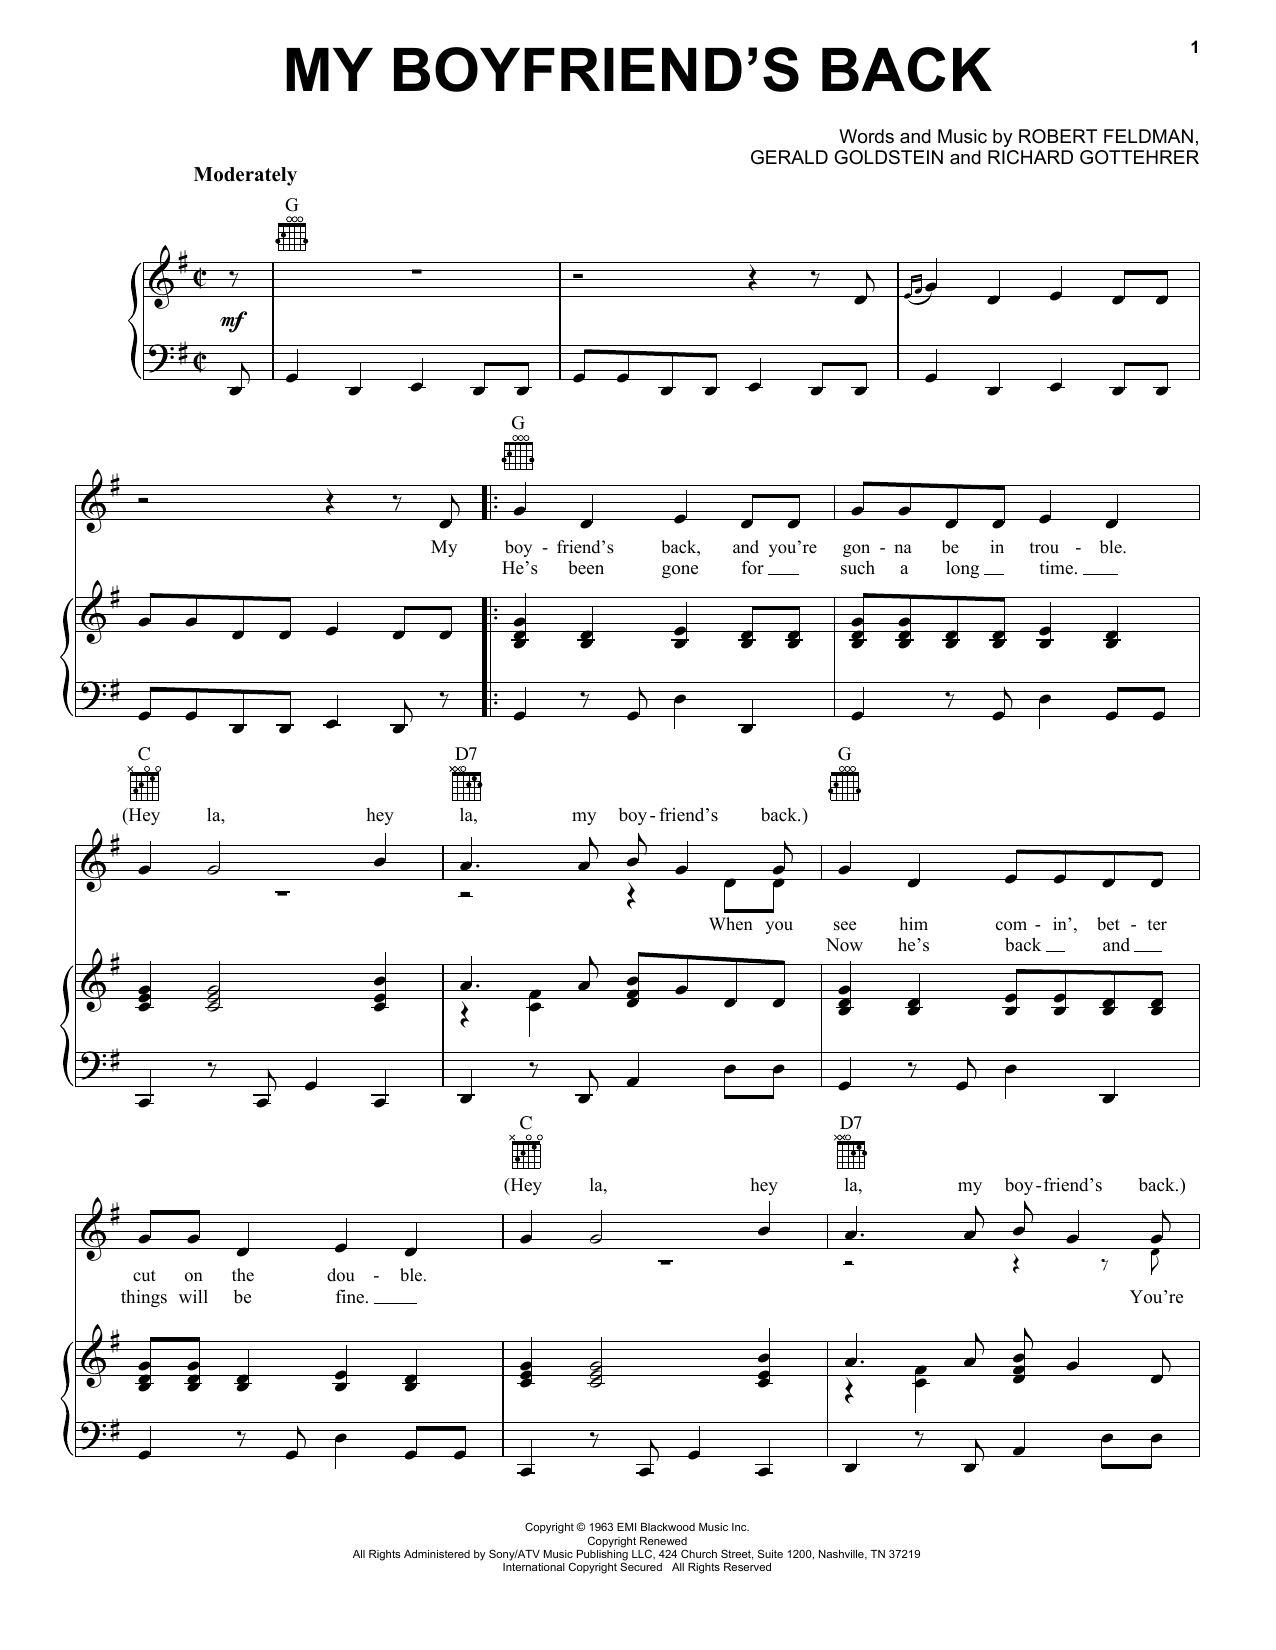 Bobby Comstock My Boyfriend's Back sheet music notes and chords. Download Printable PDF.